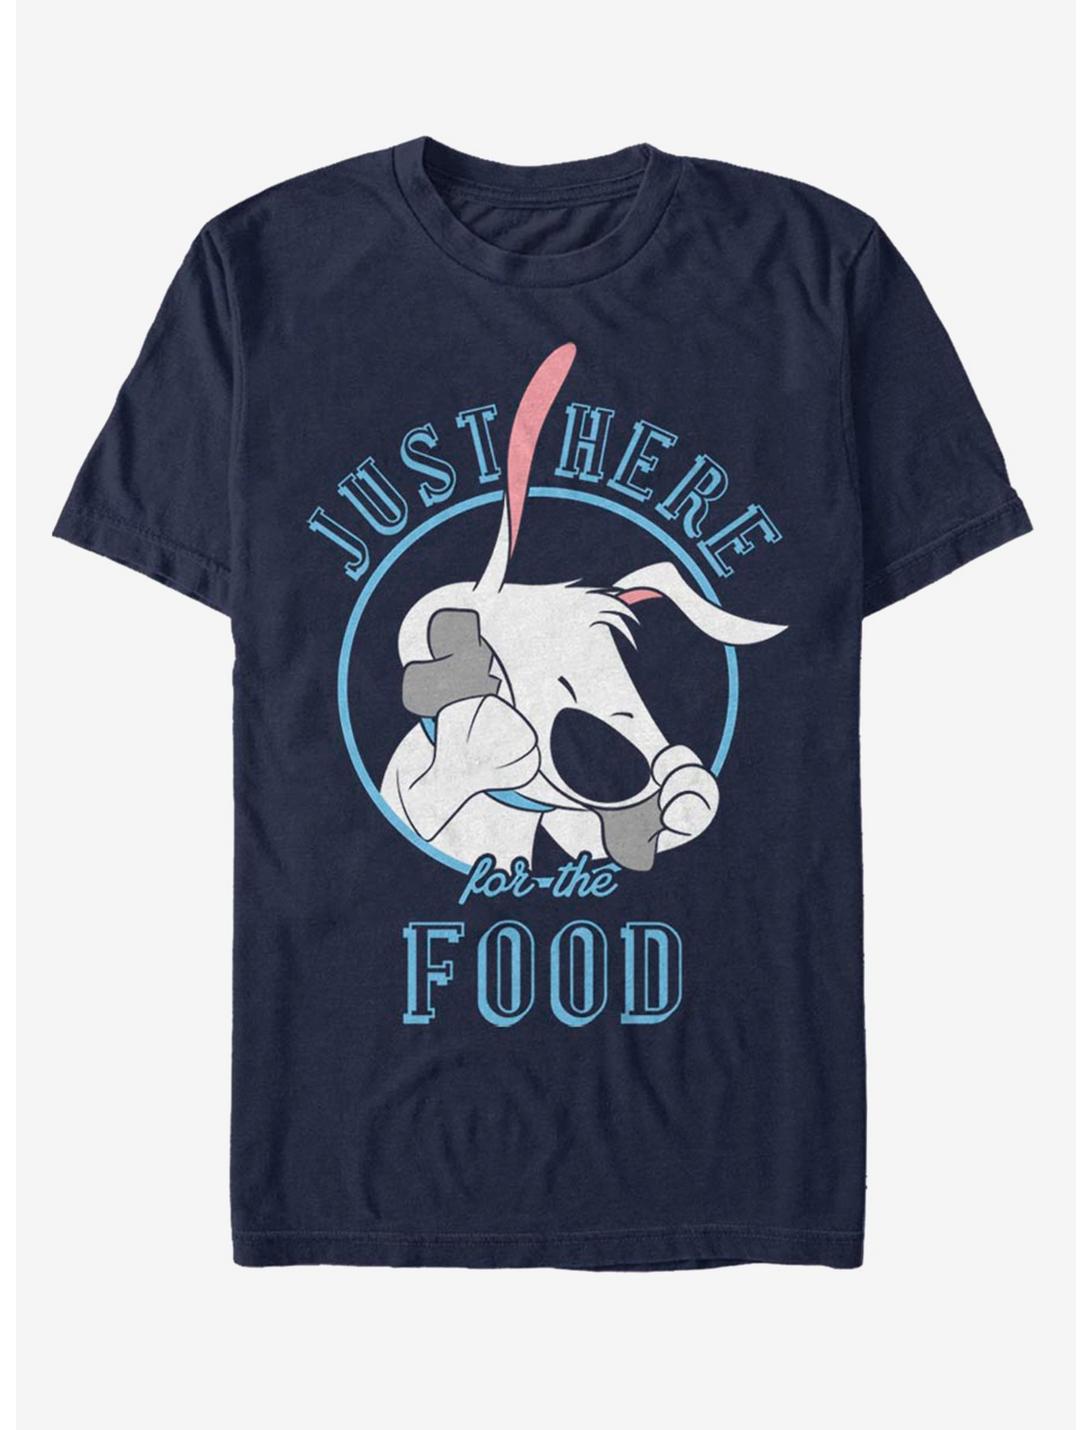 Disney Mulan Little Brother Just Here For The Food T-Shirt, NAVY, hi-res